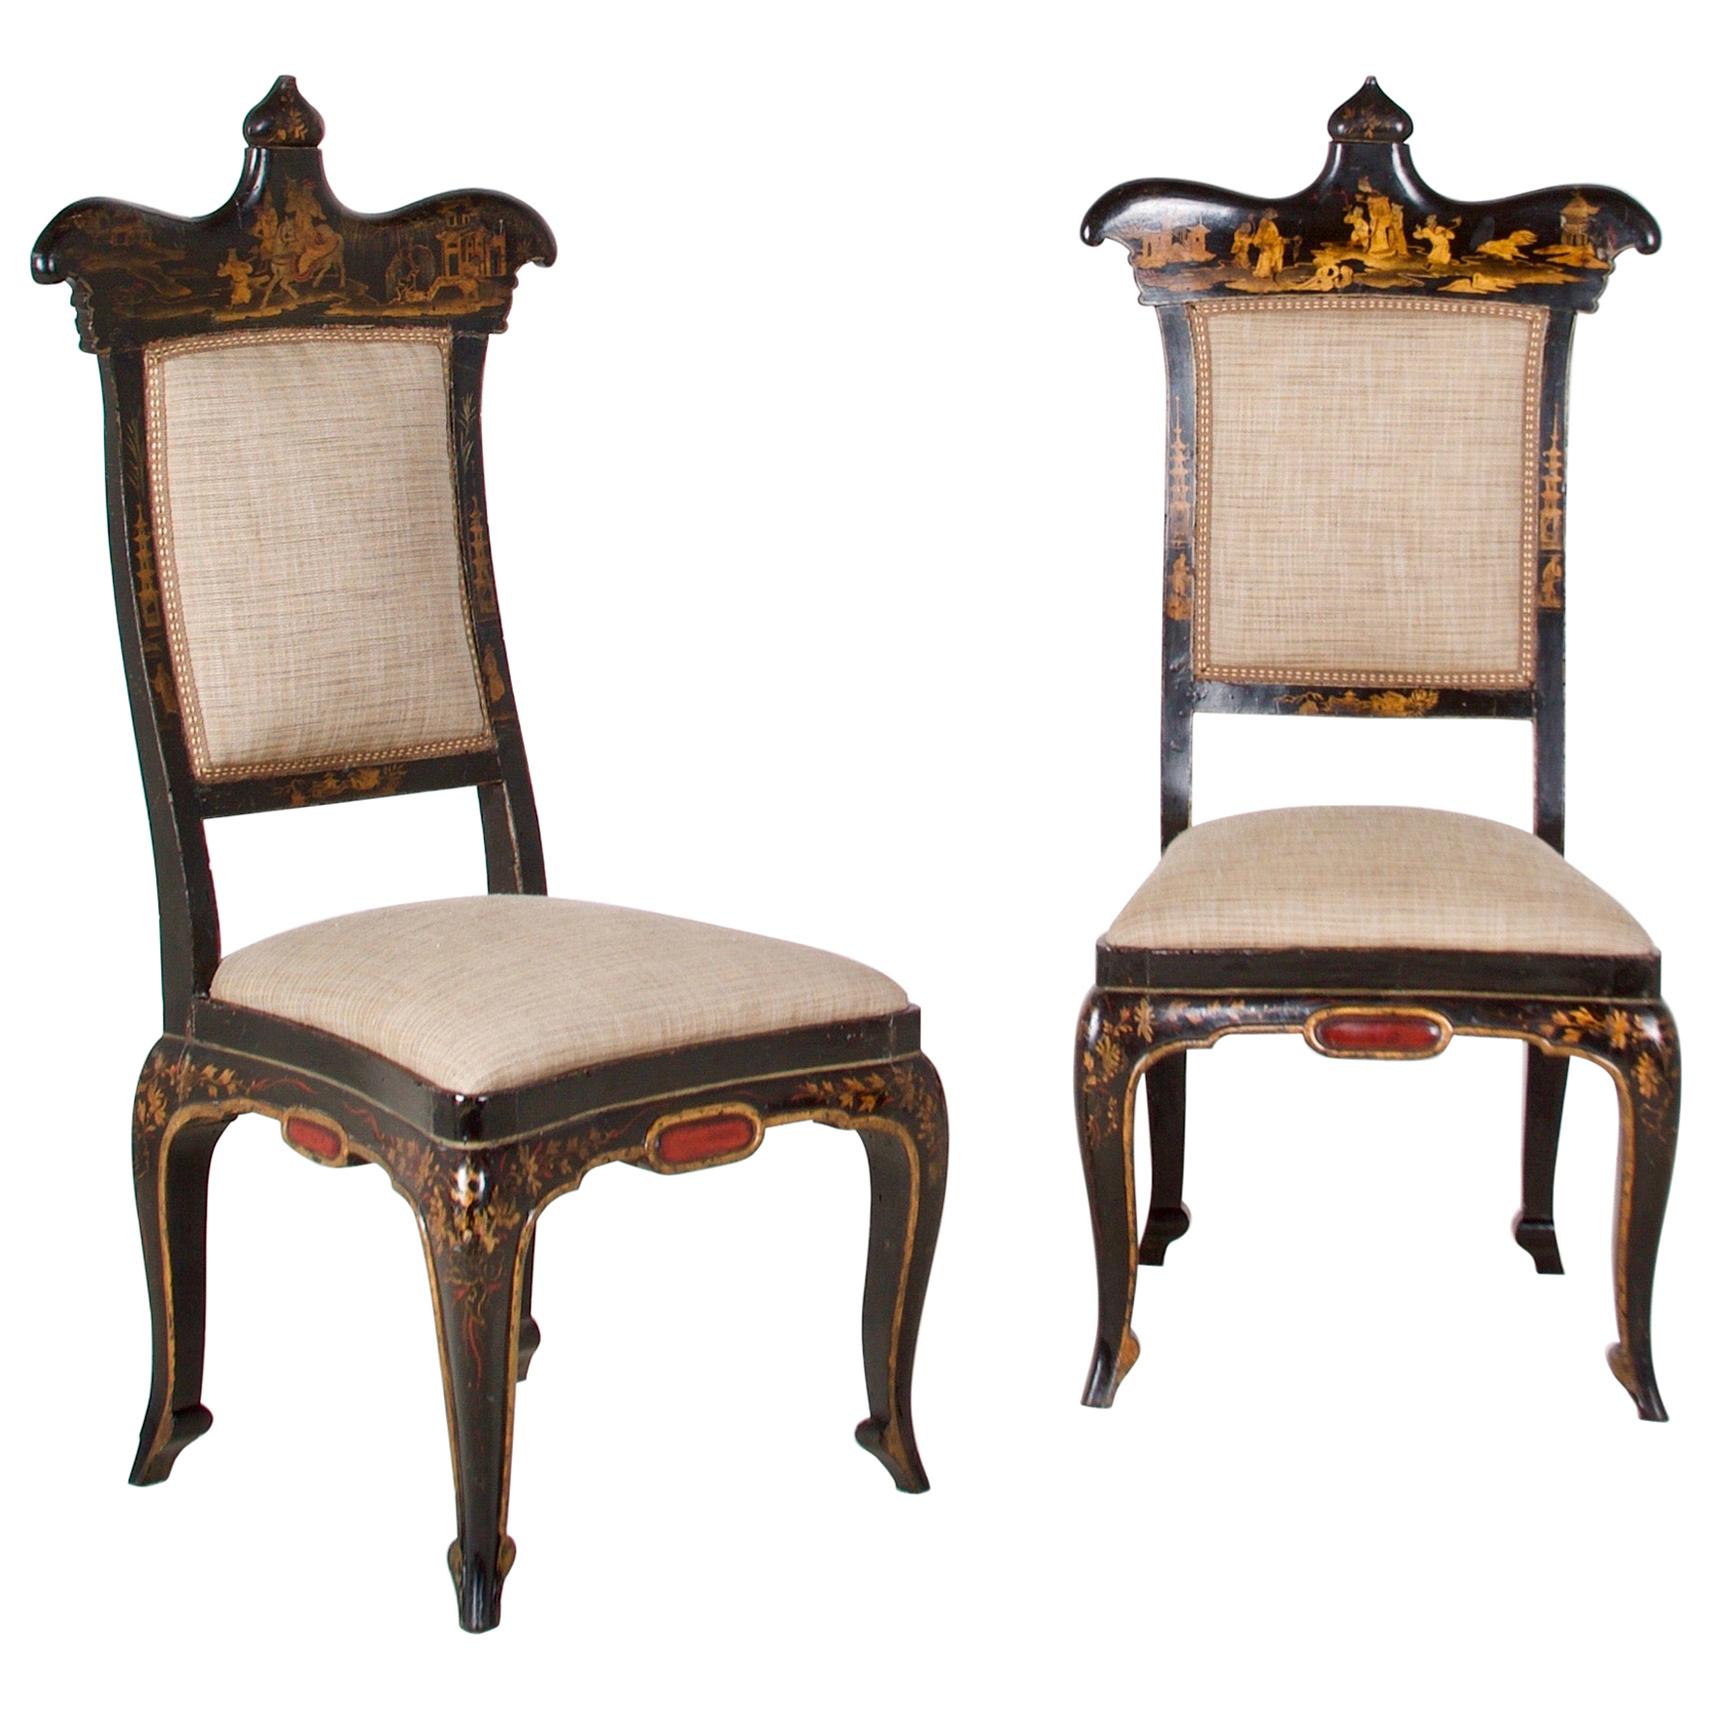  Regency Chinoiserie Decorated Side Chairs, a Pair, in the Sancsoucie manner